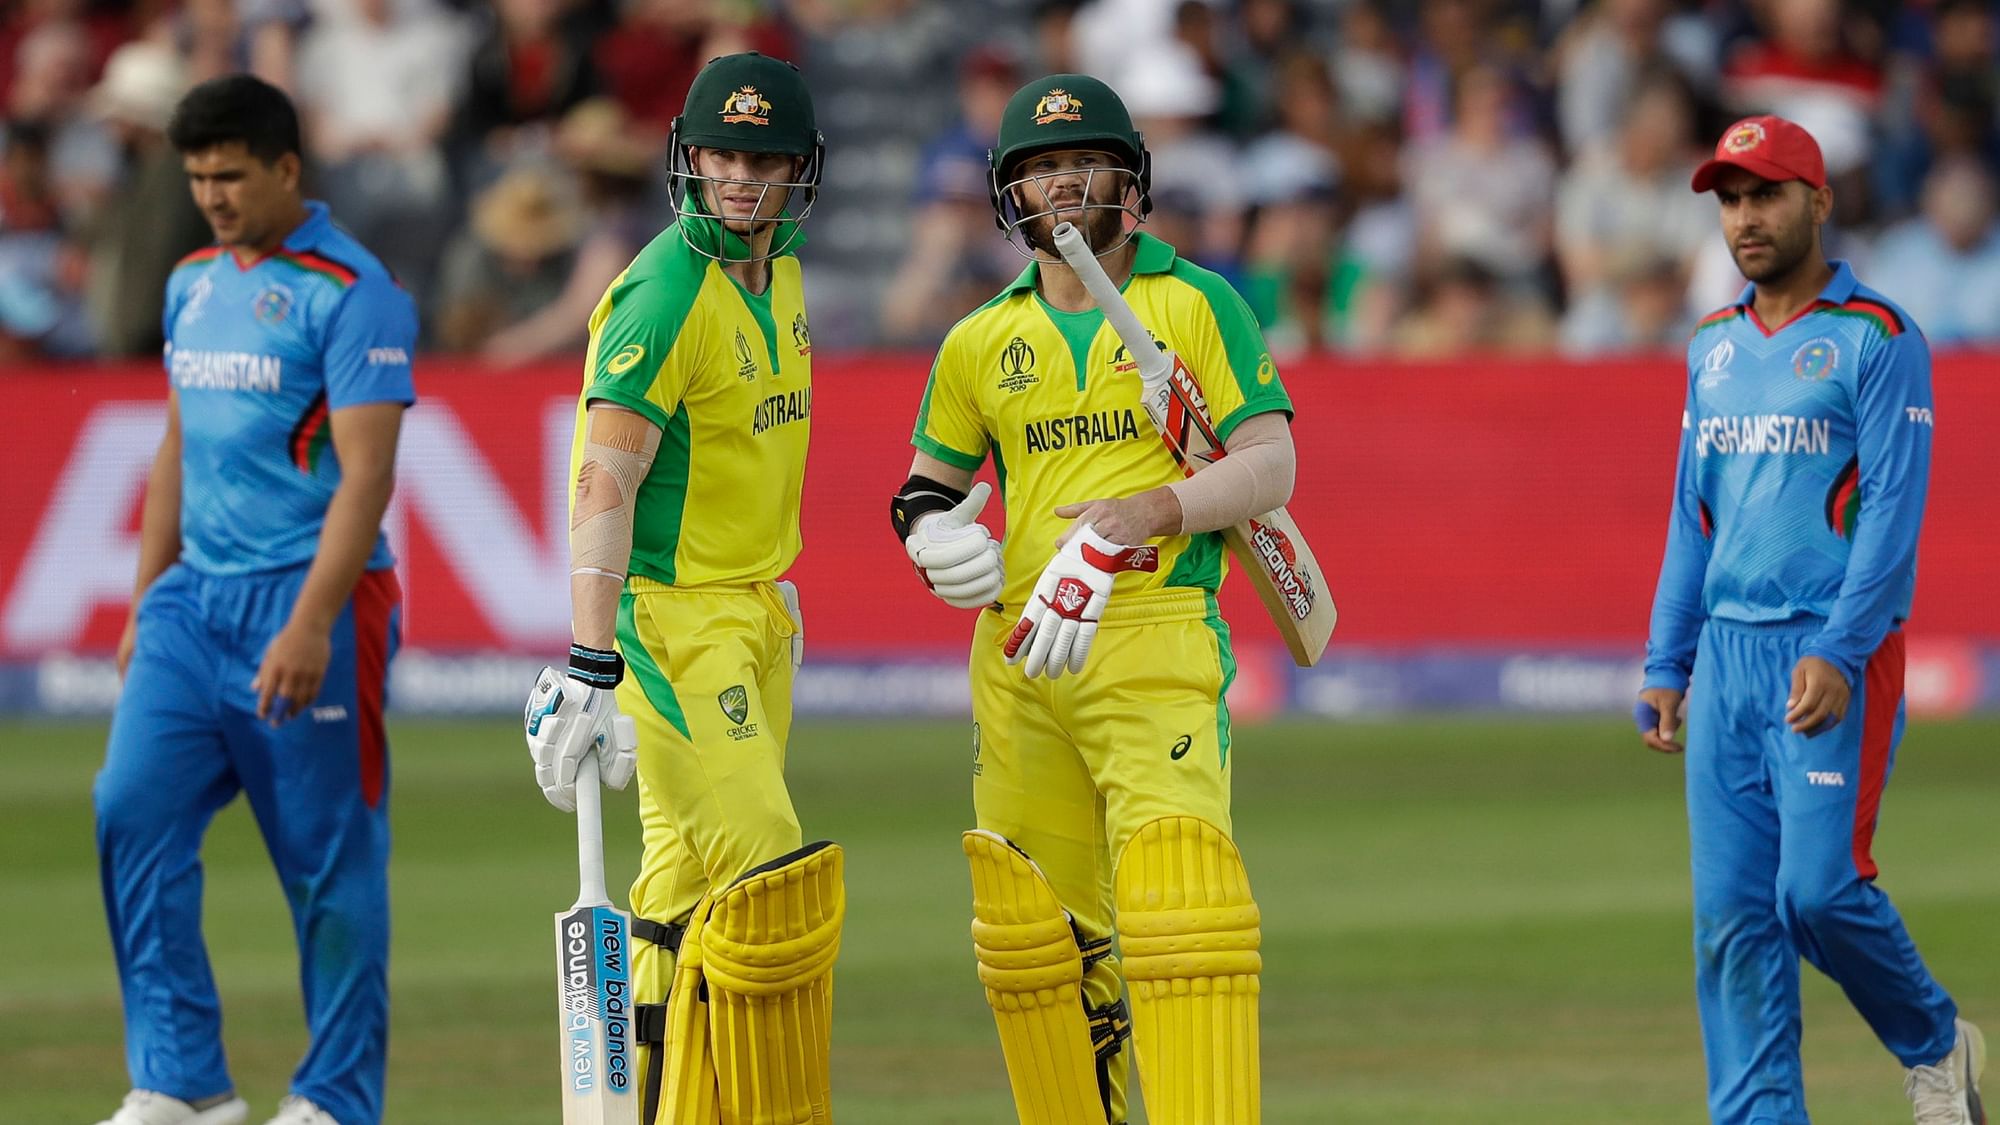  Australia reached their target with 15.1 overs to spare and David Warner was unbeaten on 89.